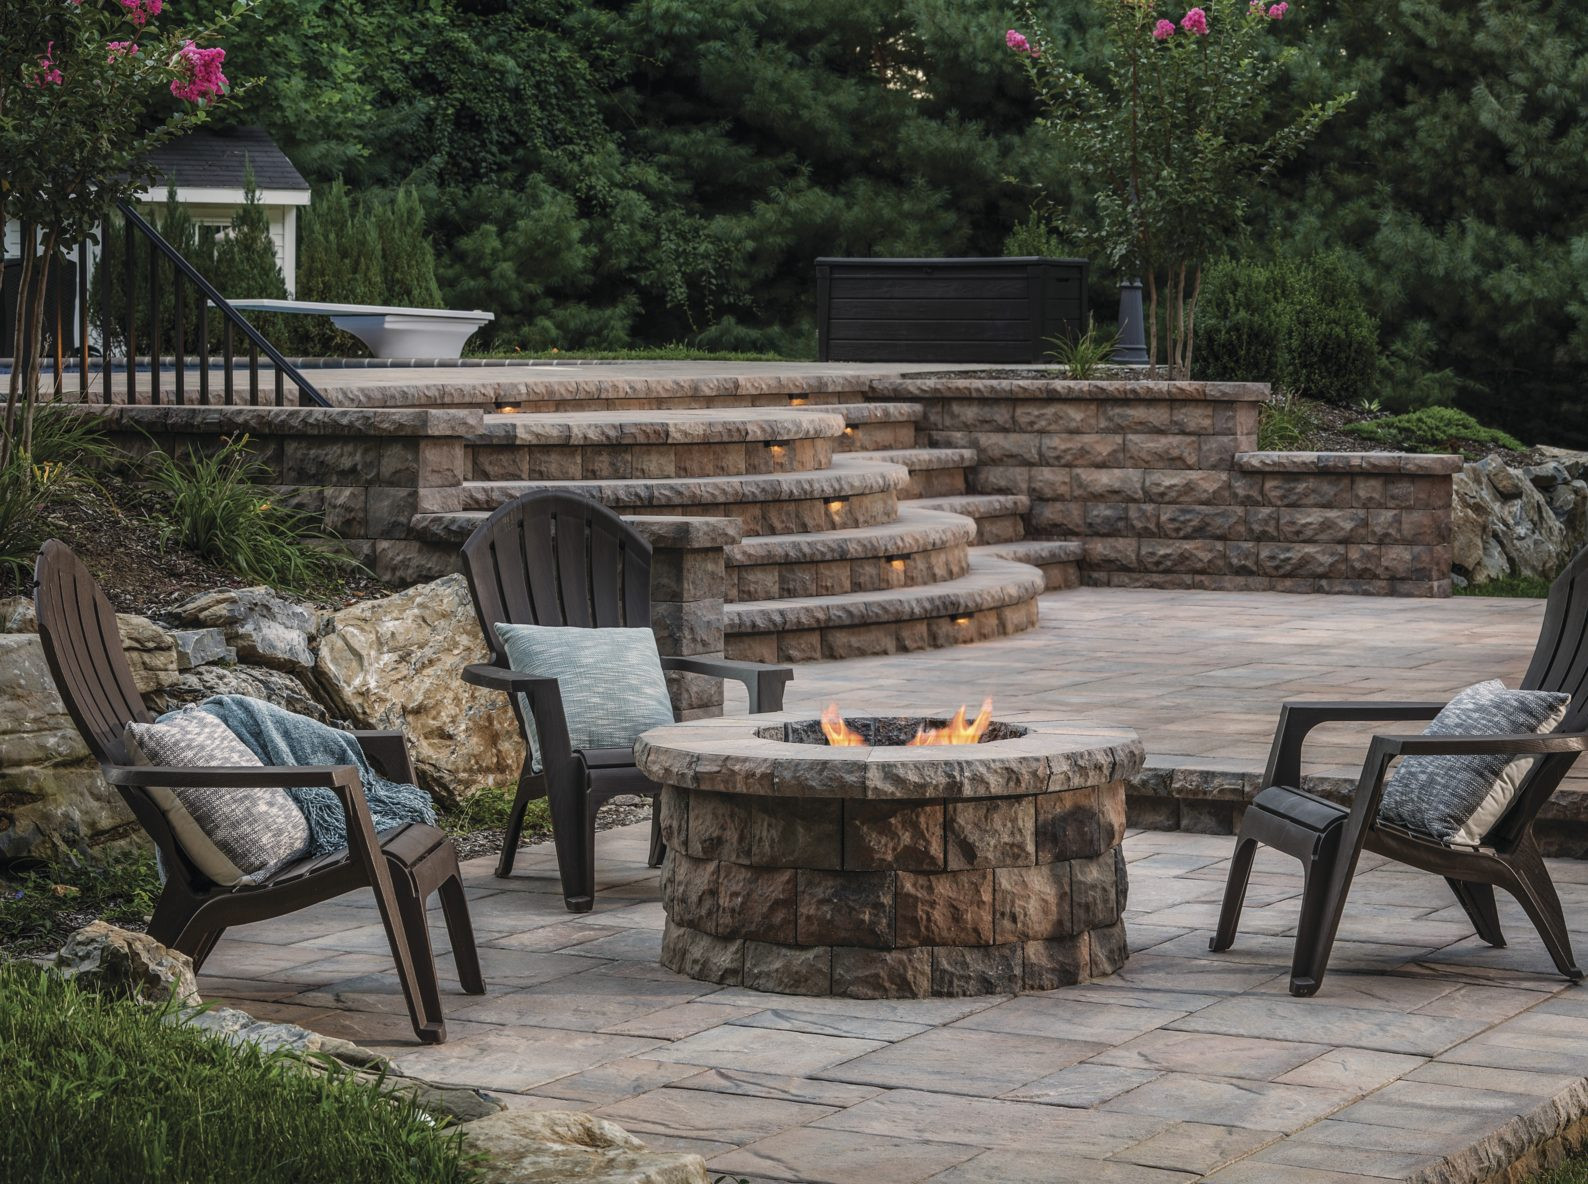 Firepit Patio Ideas
 Turn Up the Heat with These Cozy Fire Pit Patio Design